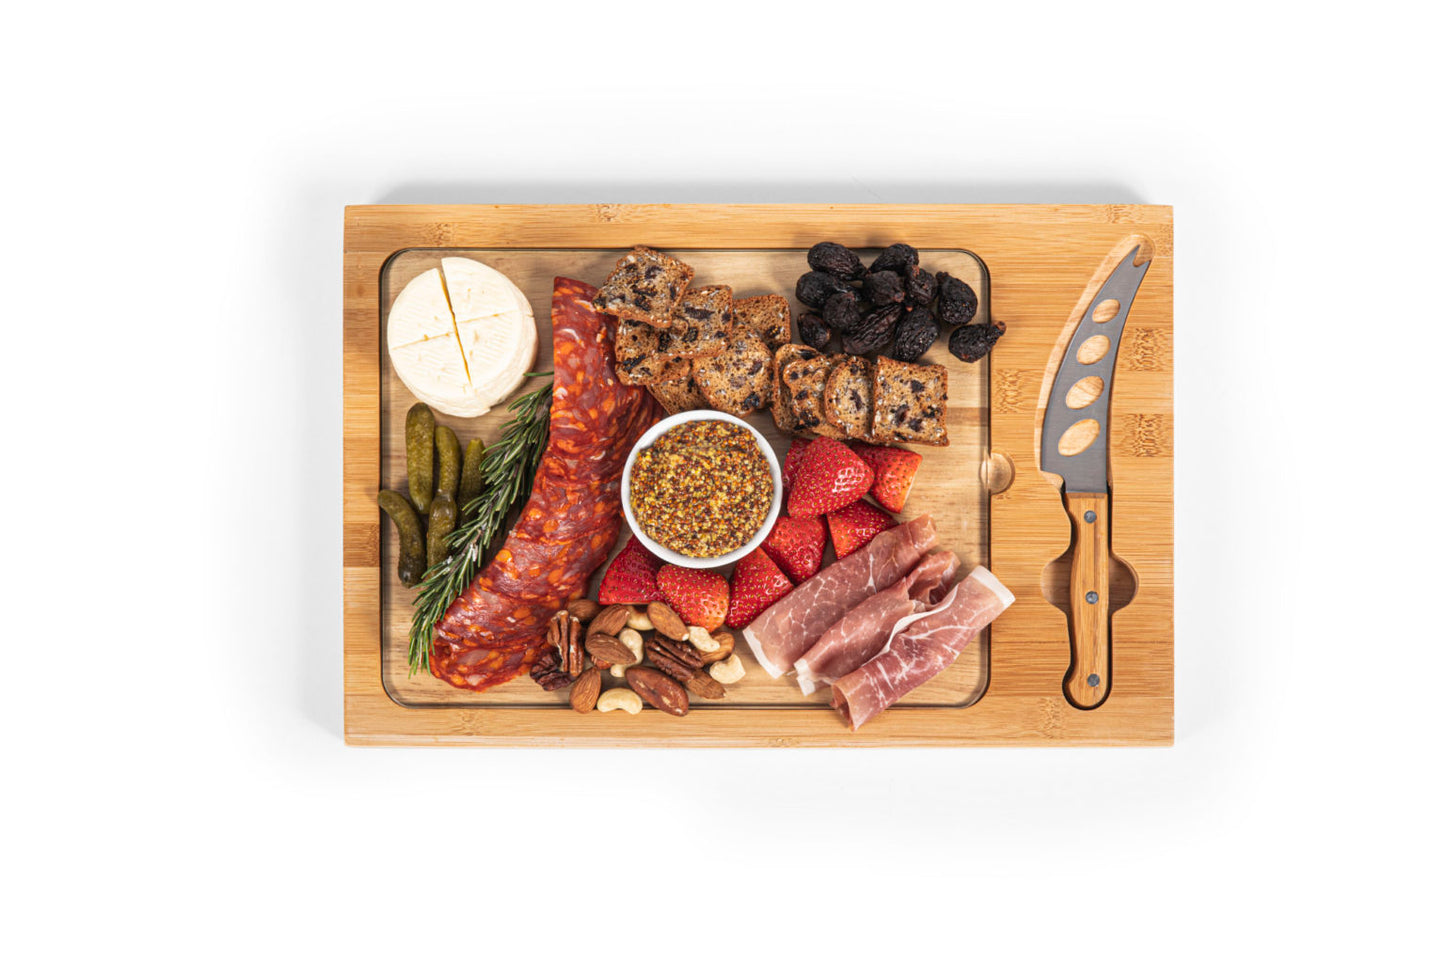 Houston Texans - Icon Glass Top Cutting Board & Knife Set by Picnic Time